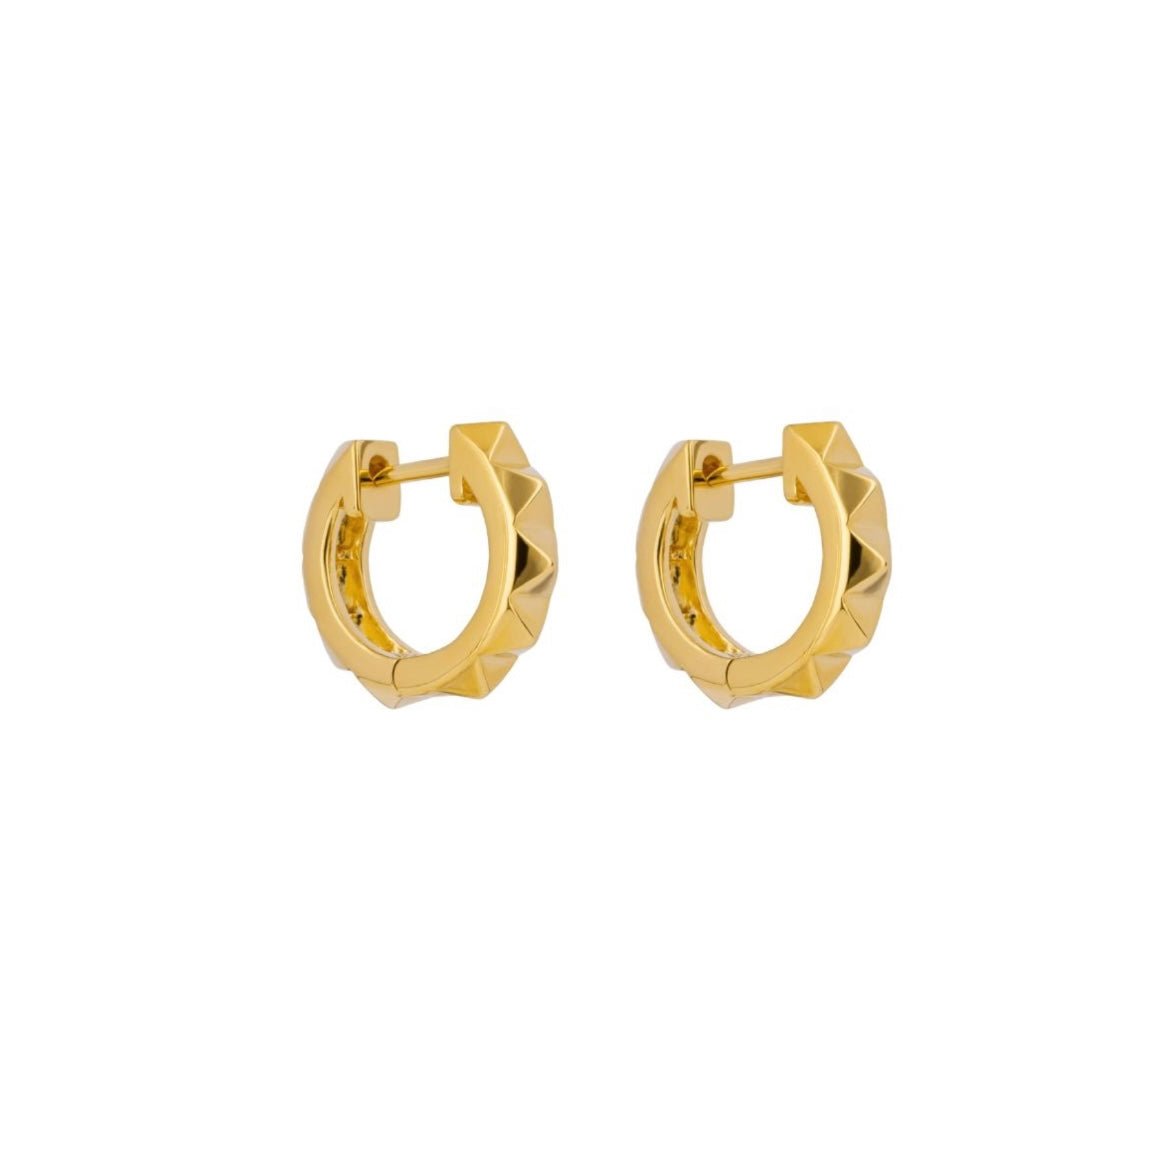 Spike stud Hoops, gold plated Earrings - Collected